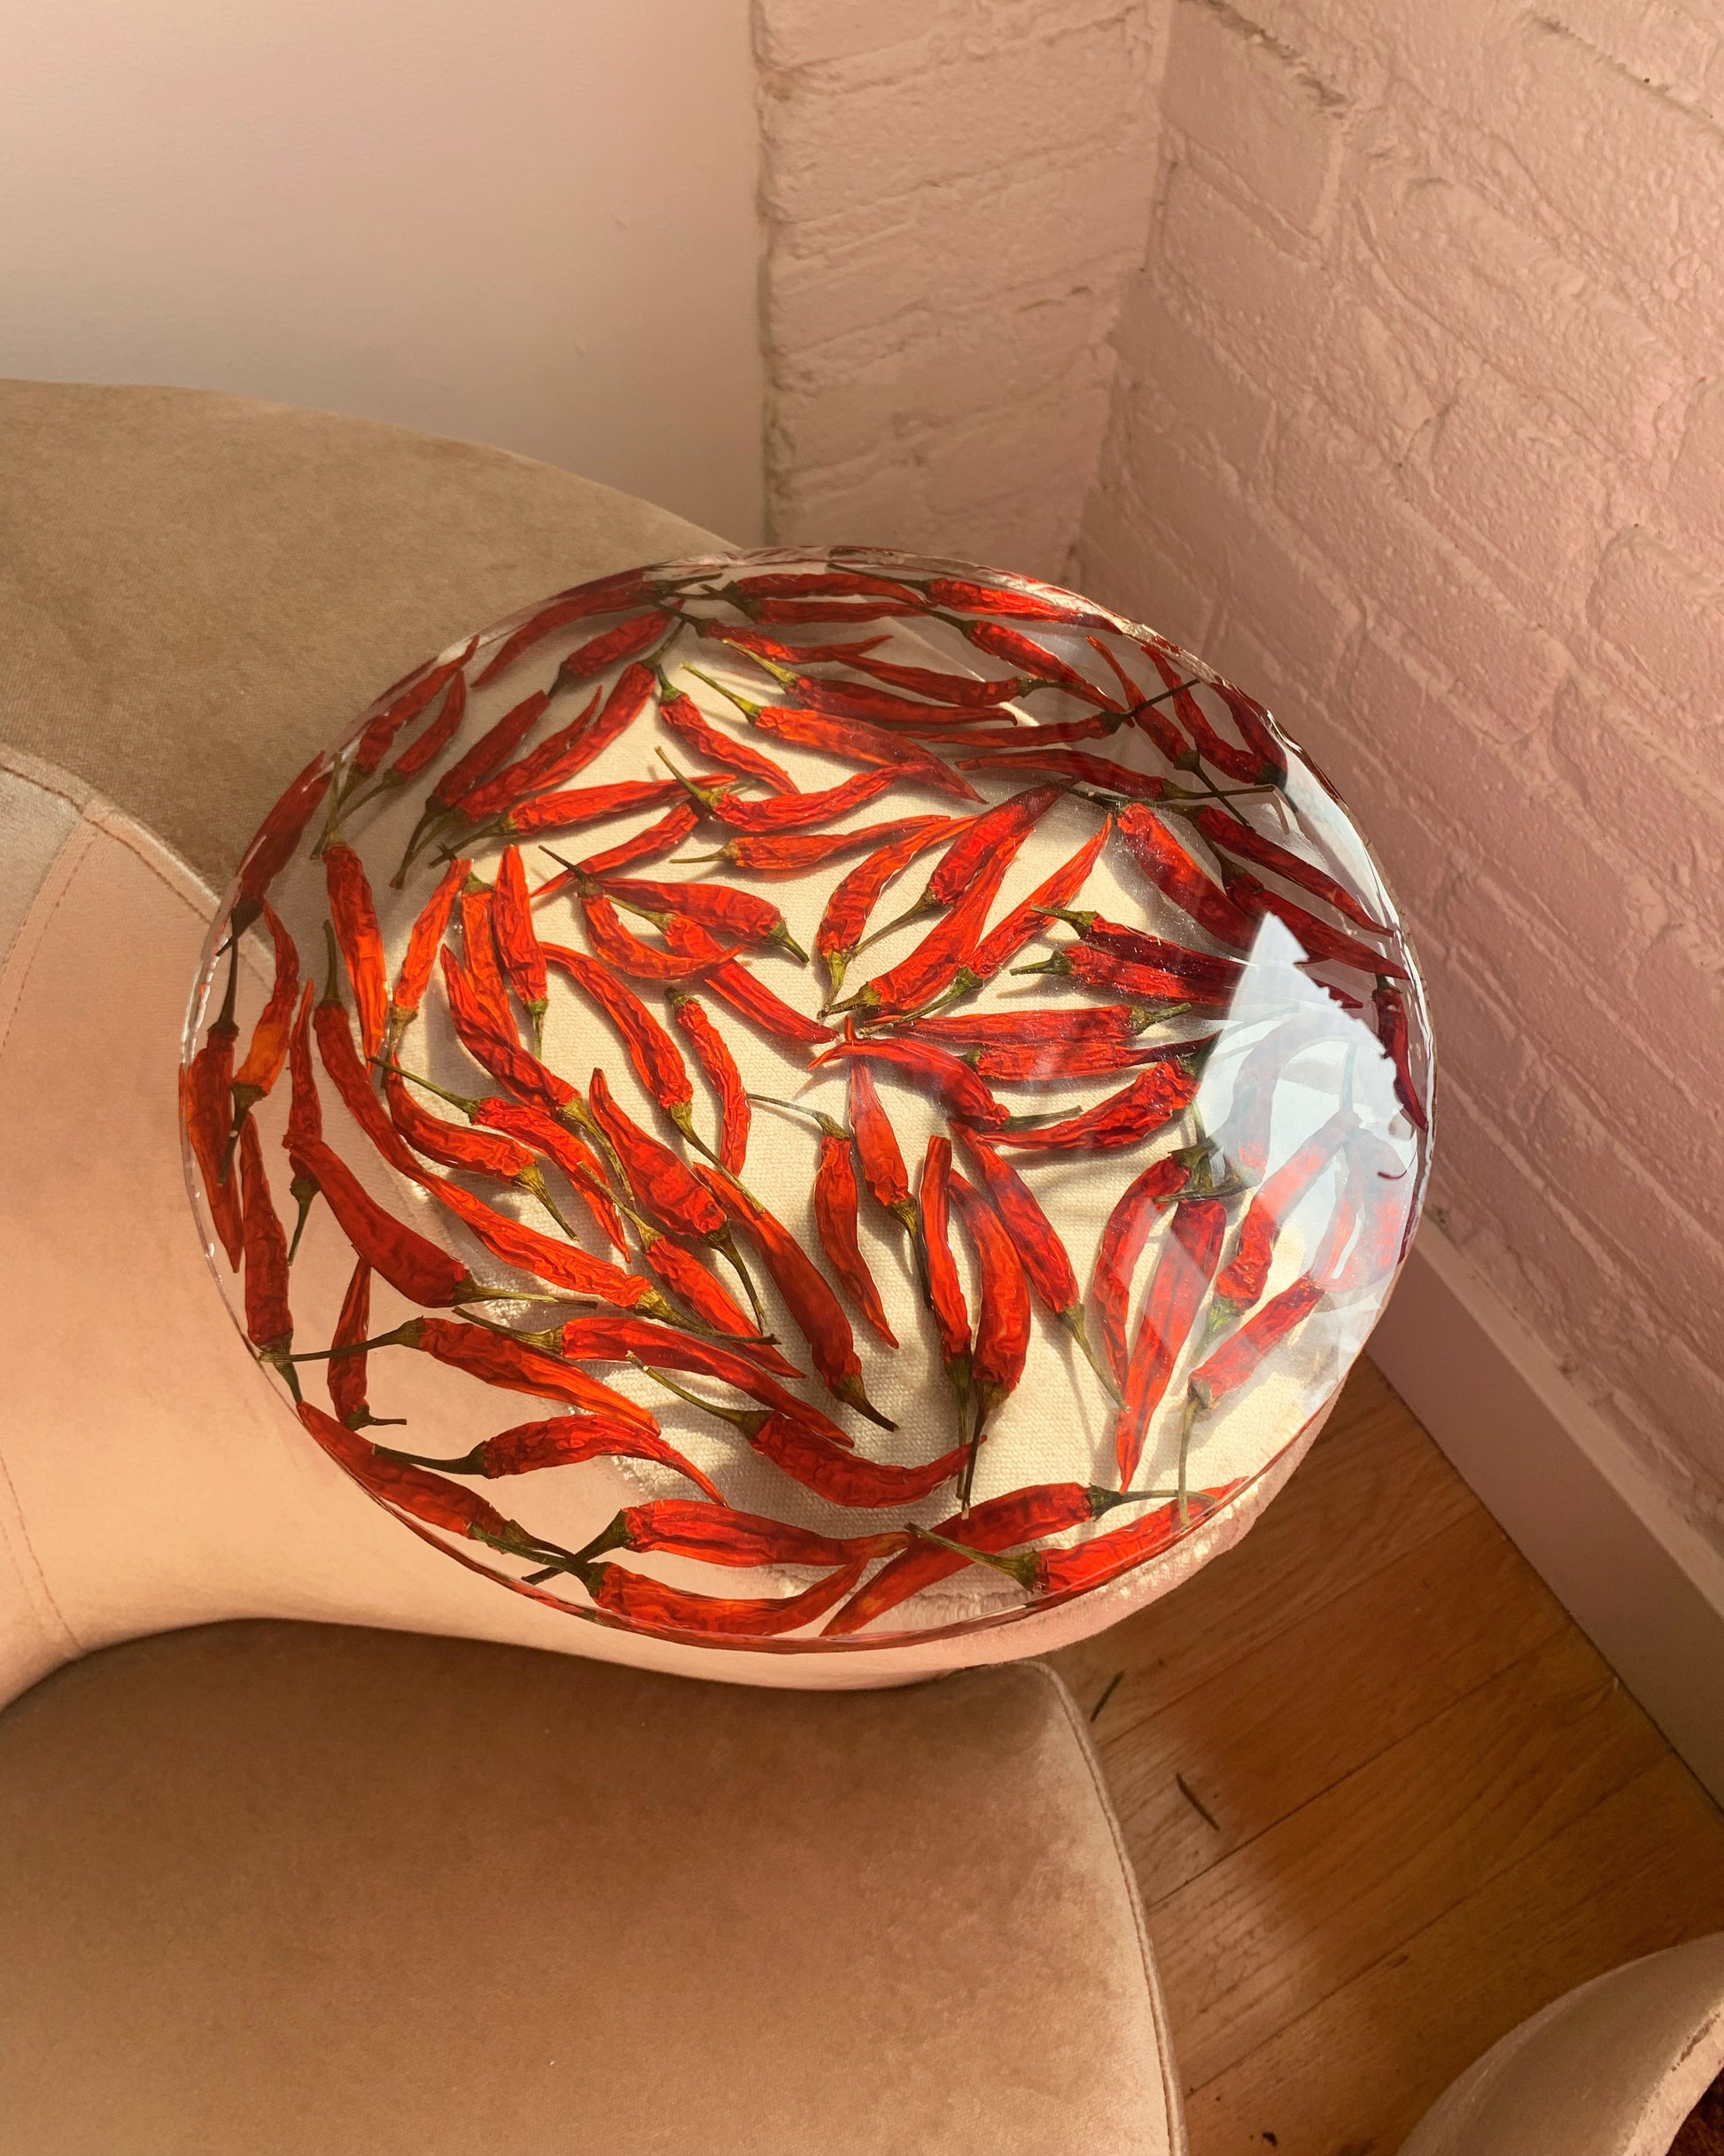 Dozens of peppers sit suspended in a round transparent resin. A durable-yet-whimsical addition to your home decor. Serve cocktails, use as a vanity tray, or simply display as an incredible objet d'art.